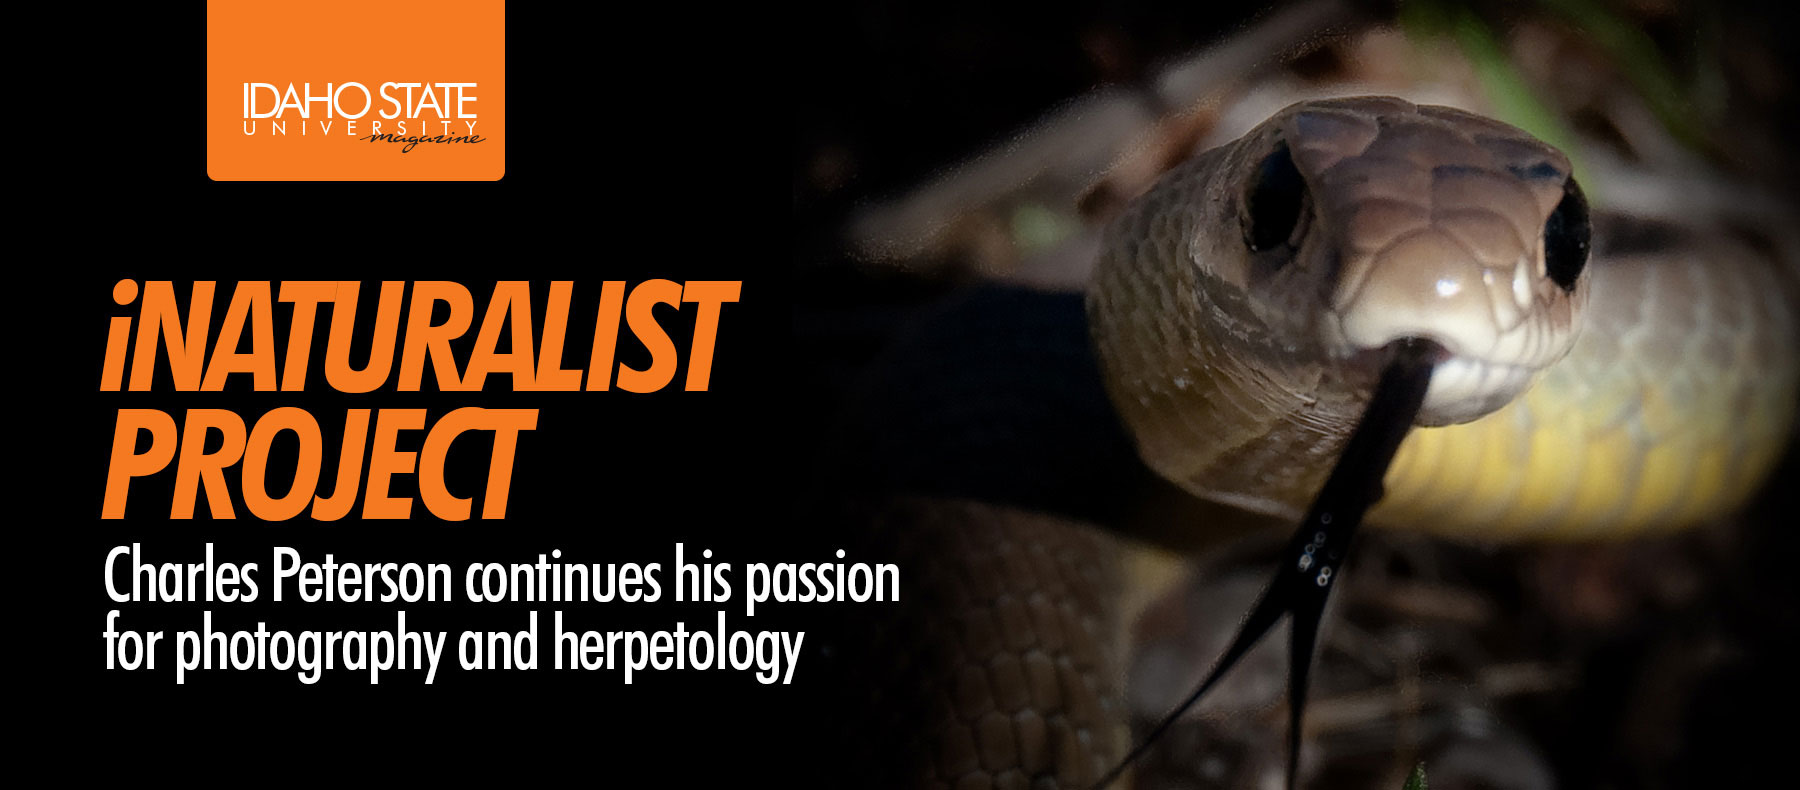 iNaturalist project - Charles Peterson continues his passion for photography and herpetology